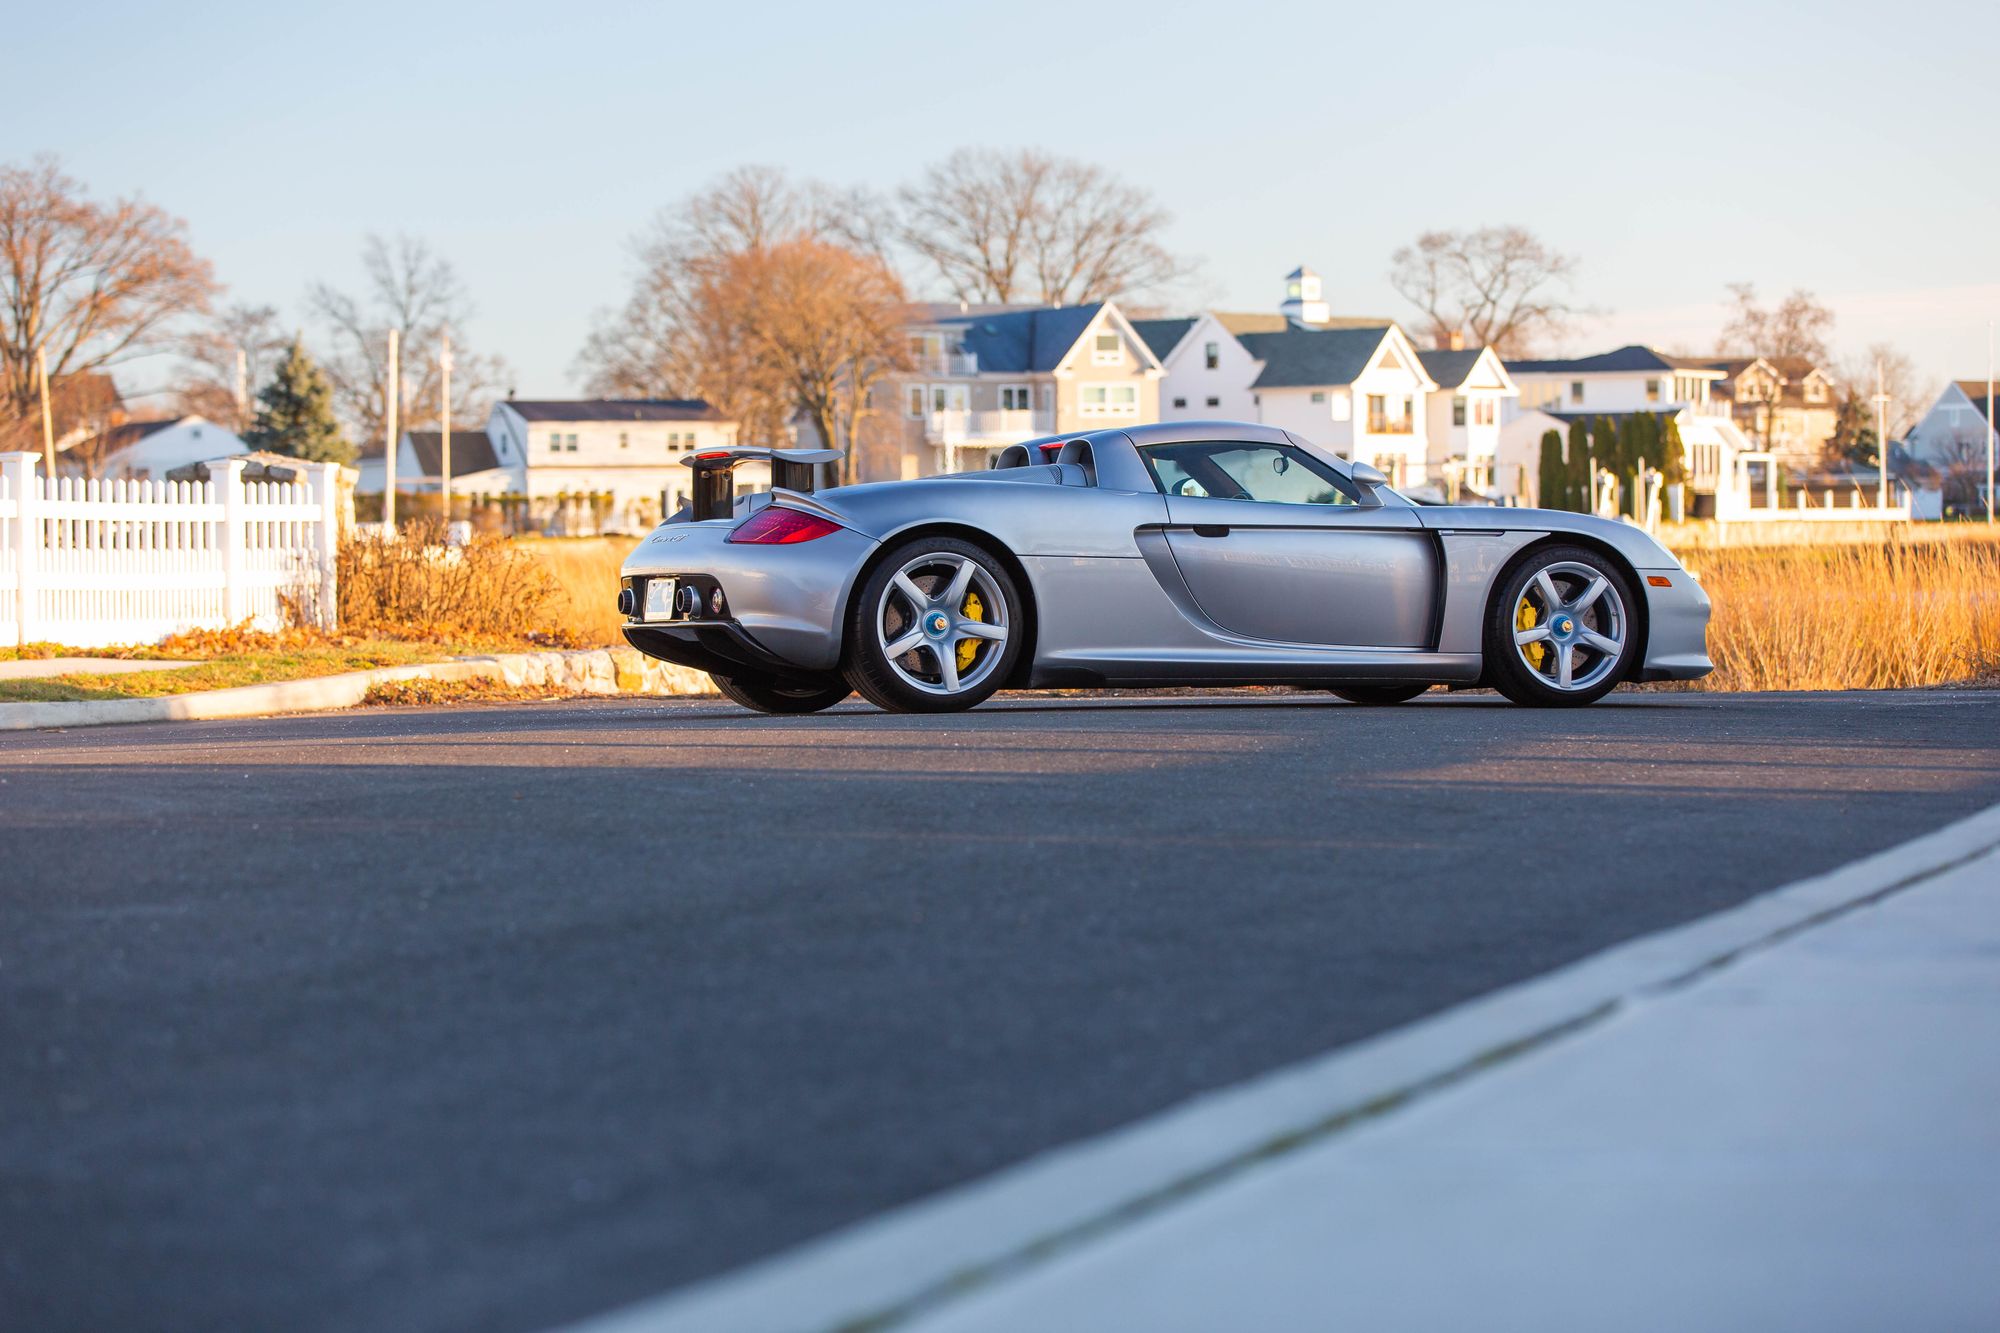 2005 Porsche Carrera GT Previously Sold | The Cultivated Collector